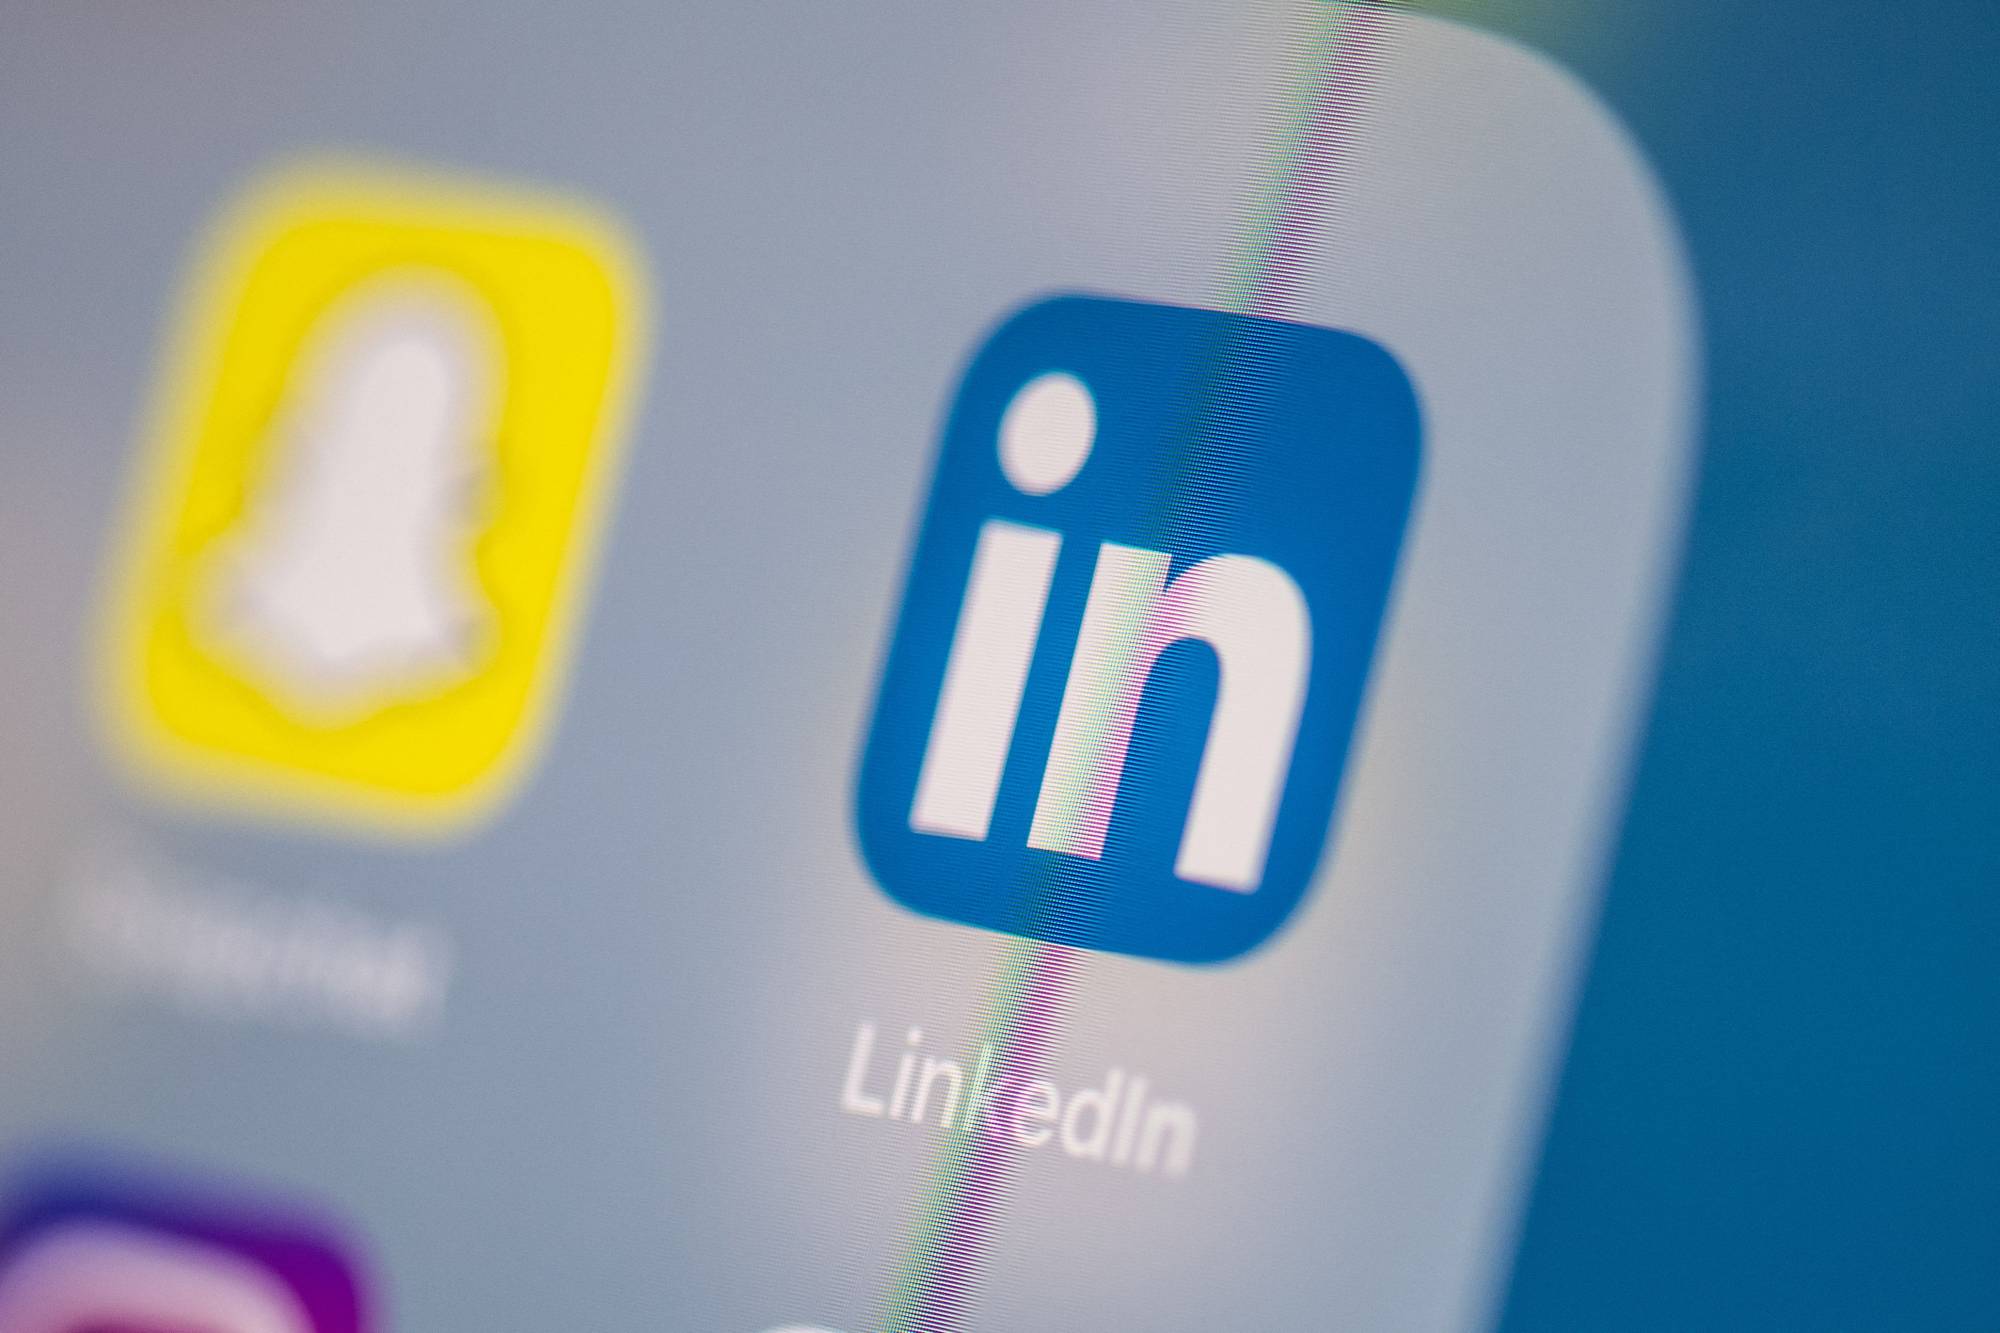 Microsoft said Thursday that it will shut down career-oriented social network LinkedIn in China, citing a 'challenging operating environment' as Beijing tightens control over tech firms. | AFP-JIJI